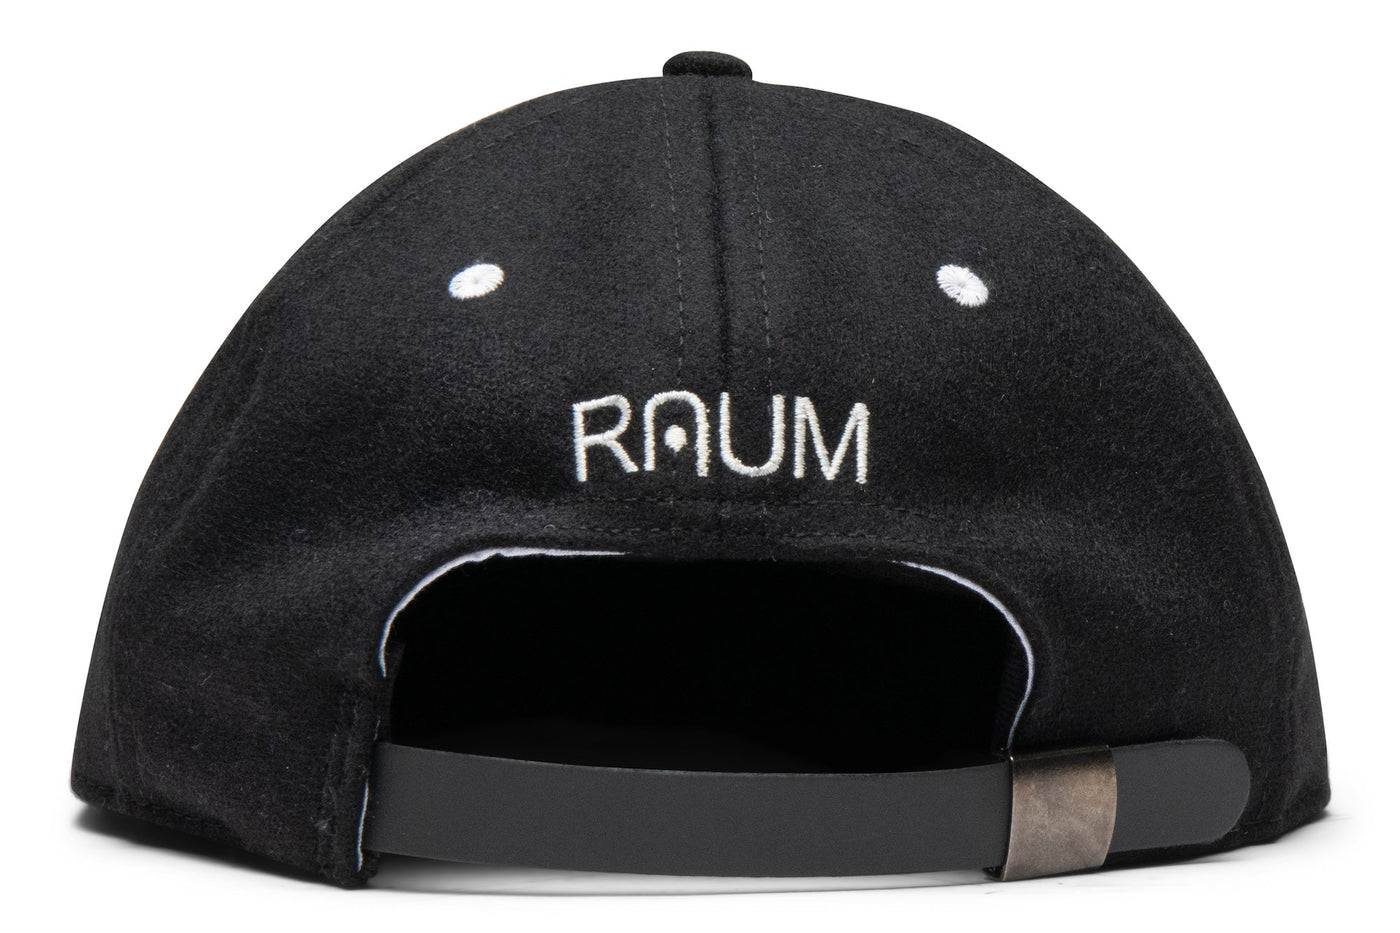 Vintage Ball Cap - 100% Wool Made in USA by Raum